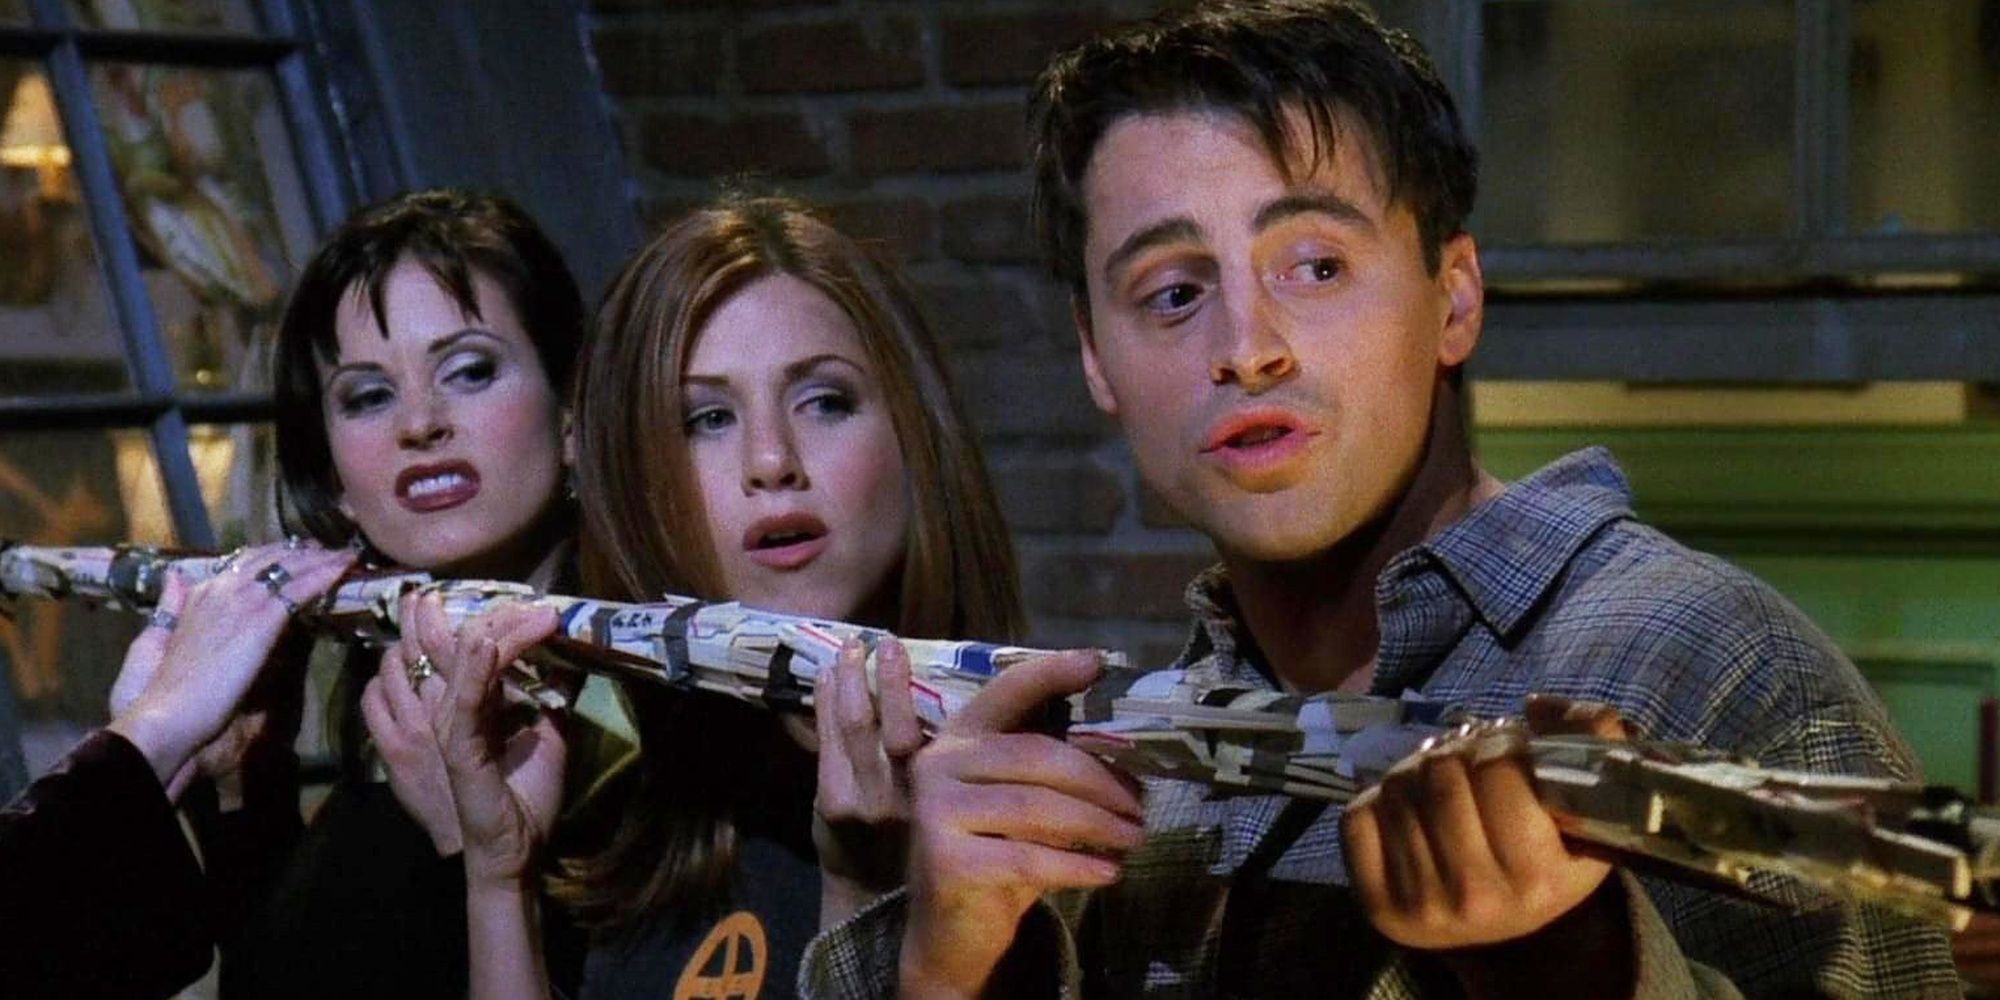 monica rachel and joey on friends with the poking stick